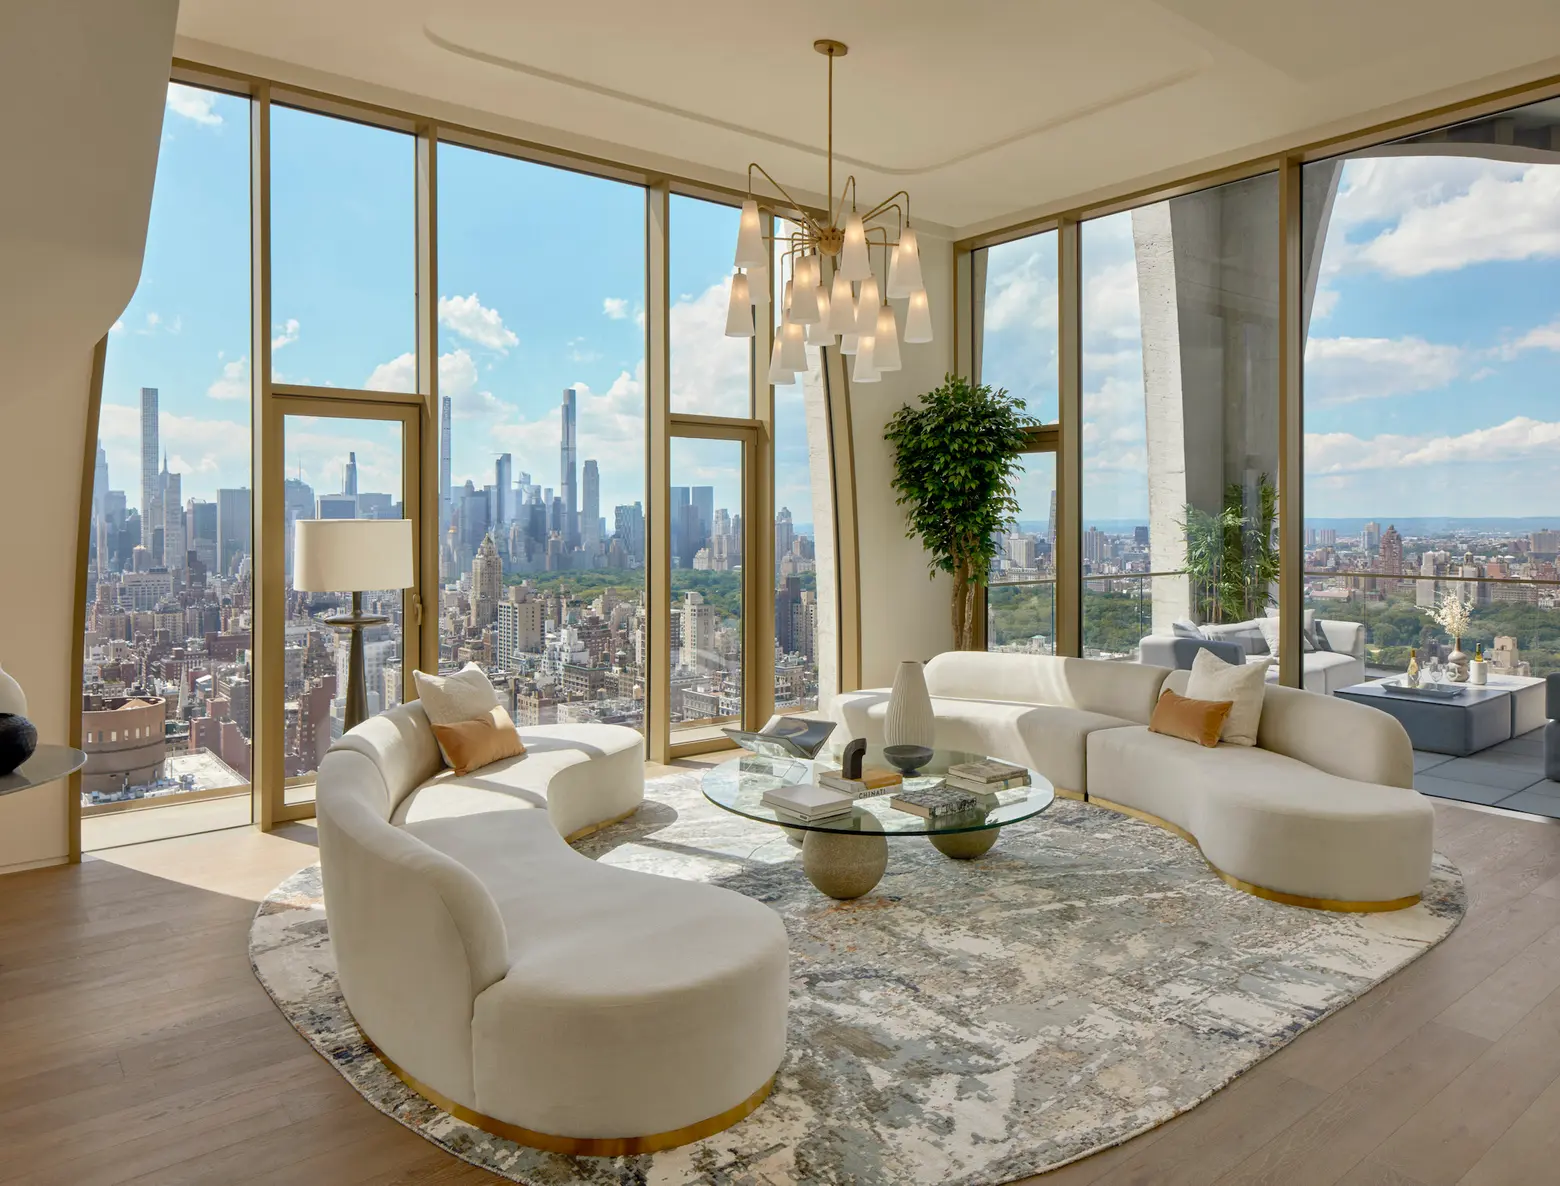 Take a tour of the tallest penthouse on the Upper East Side, asking $33M